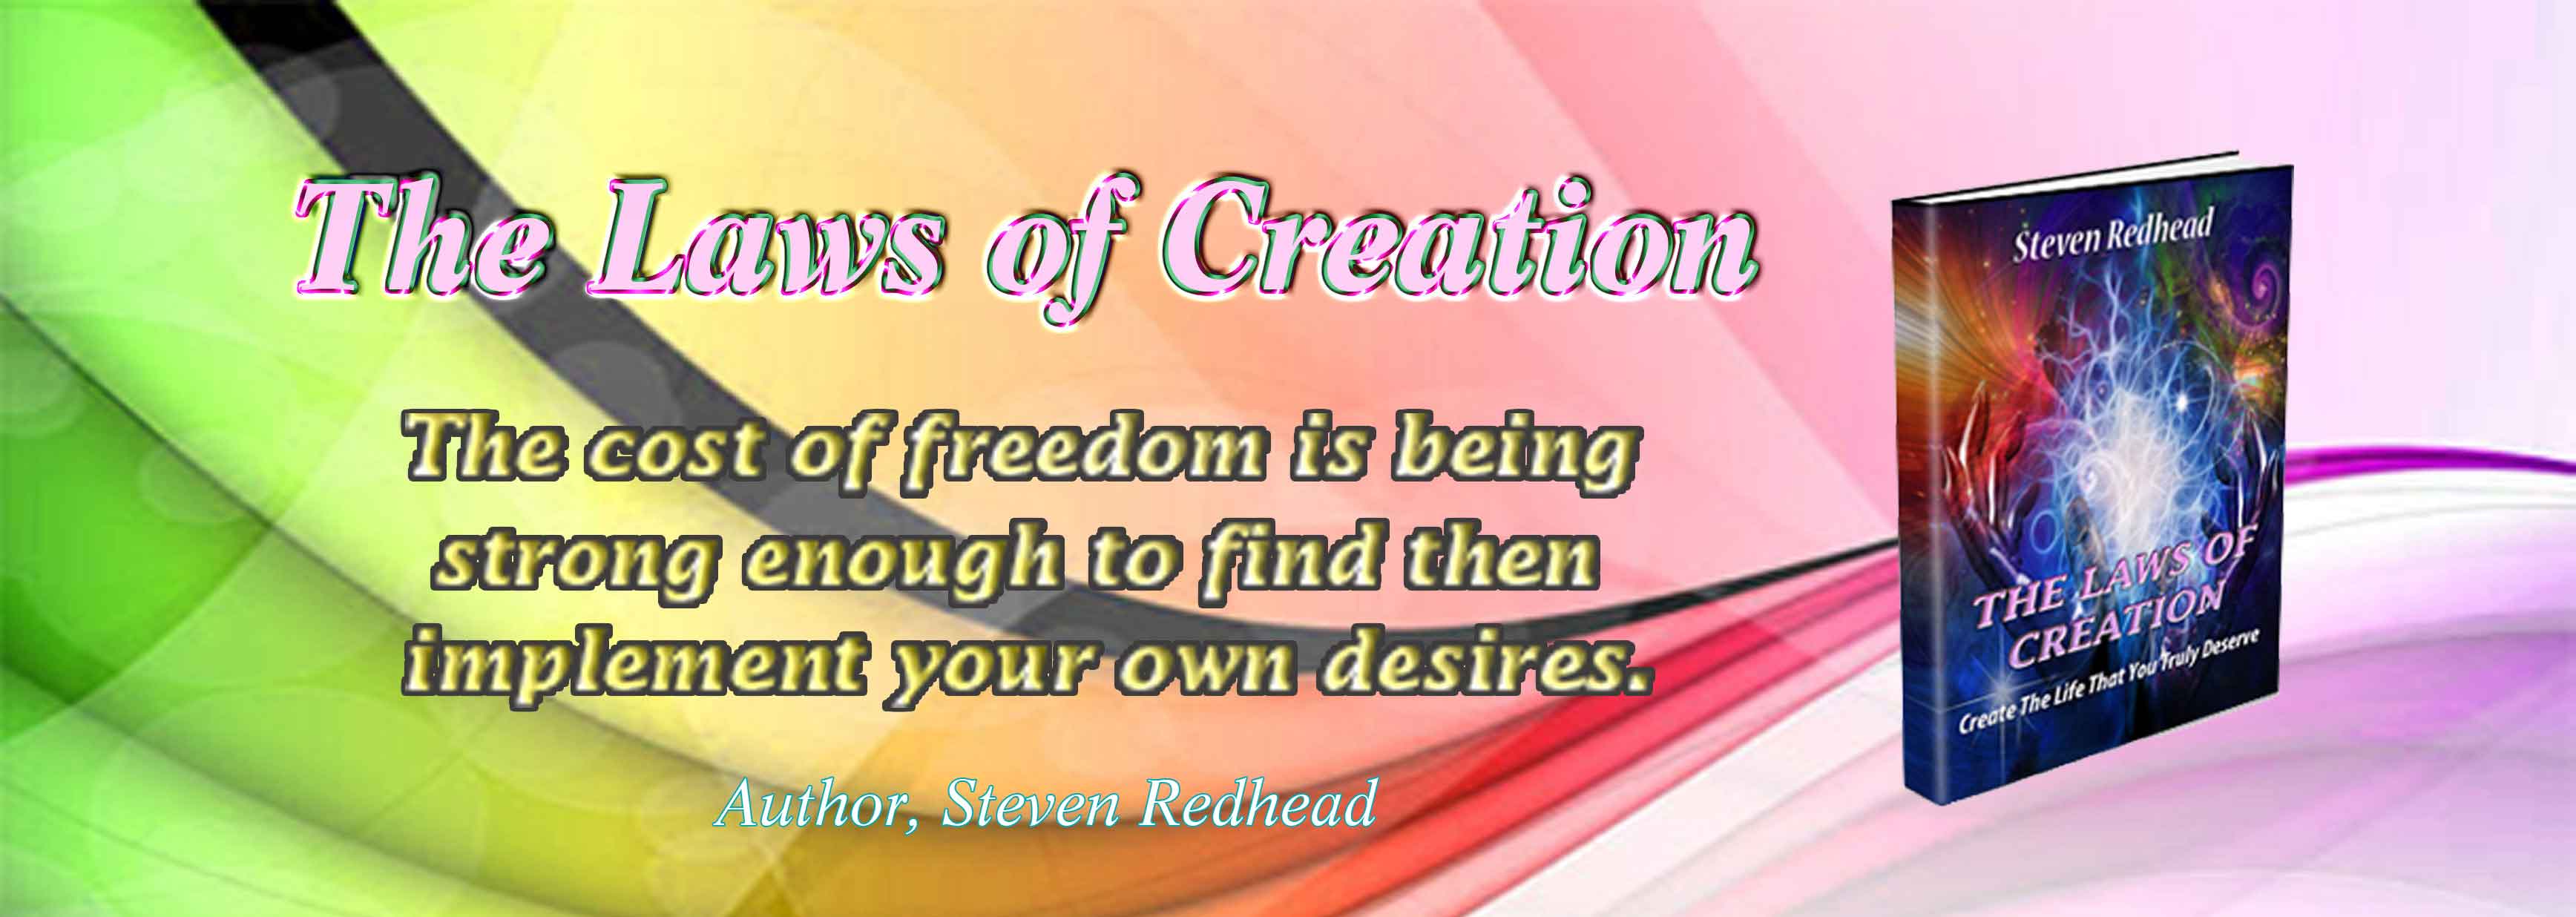 The Laws Of Creation Book Freedom quote 